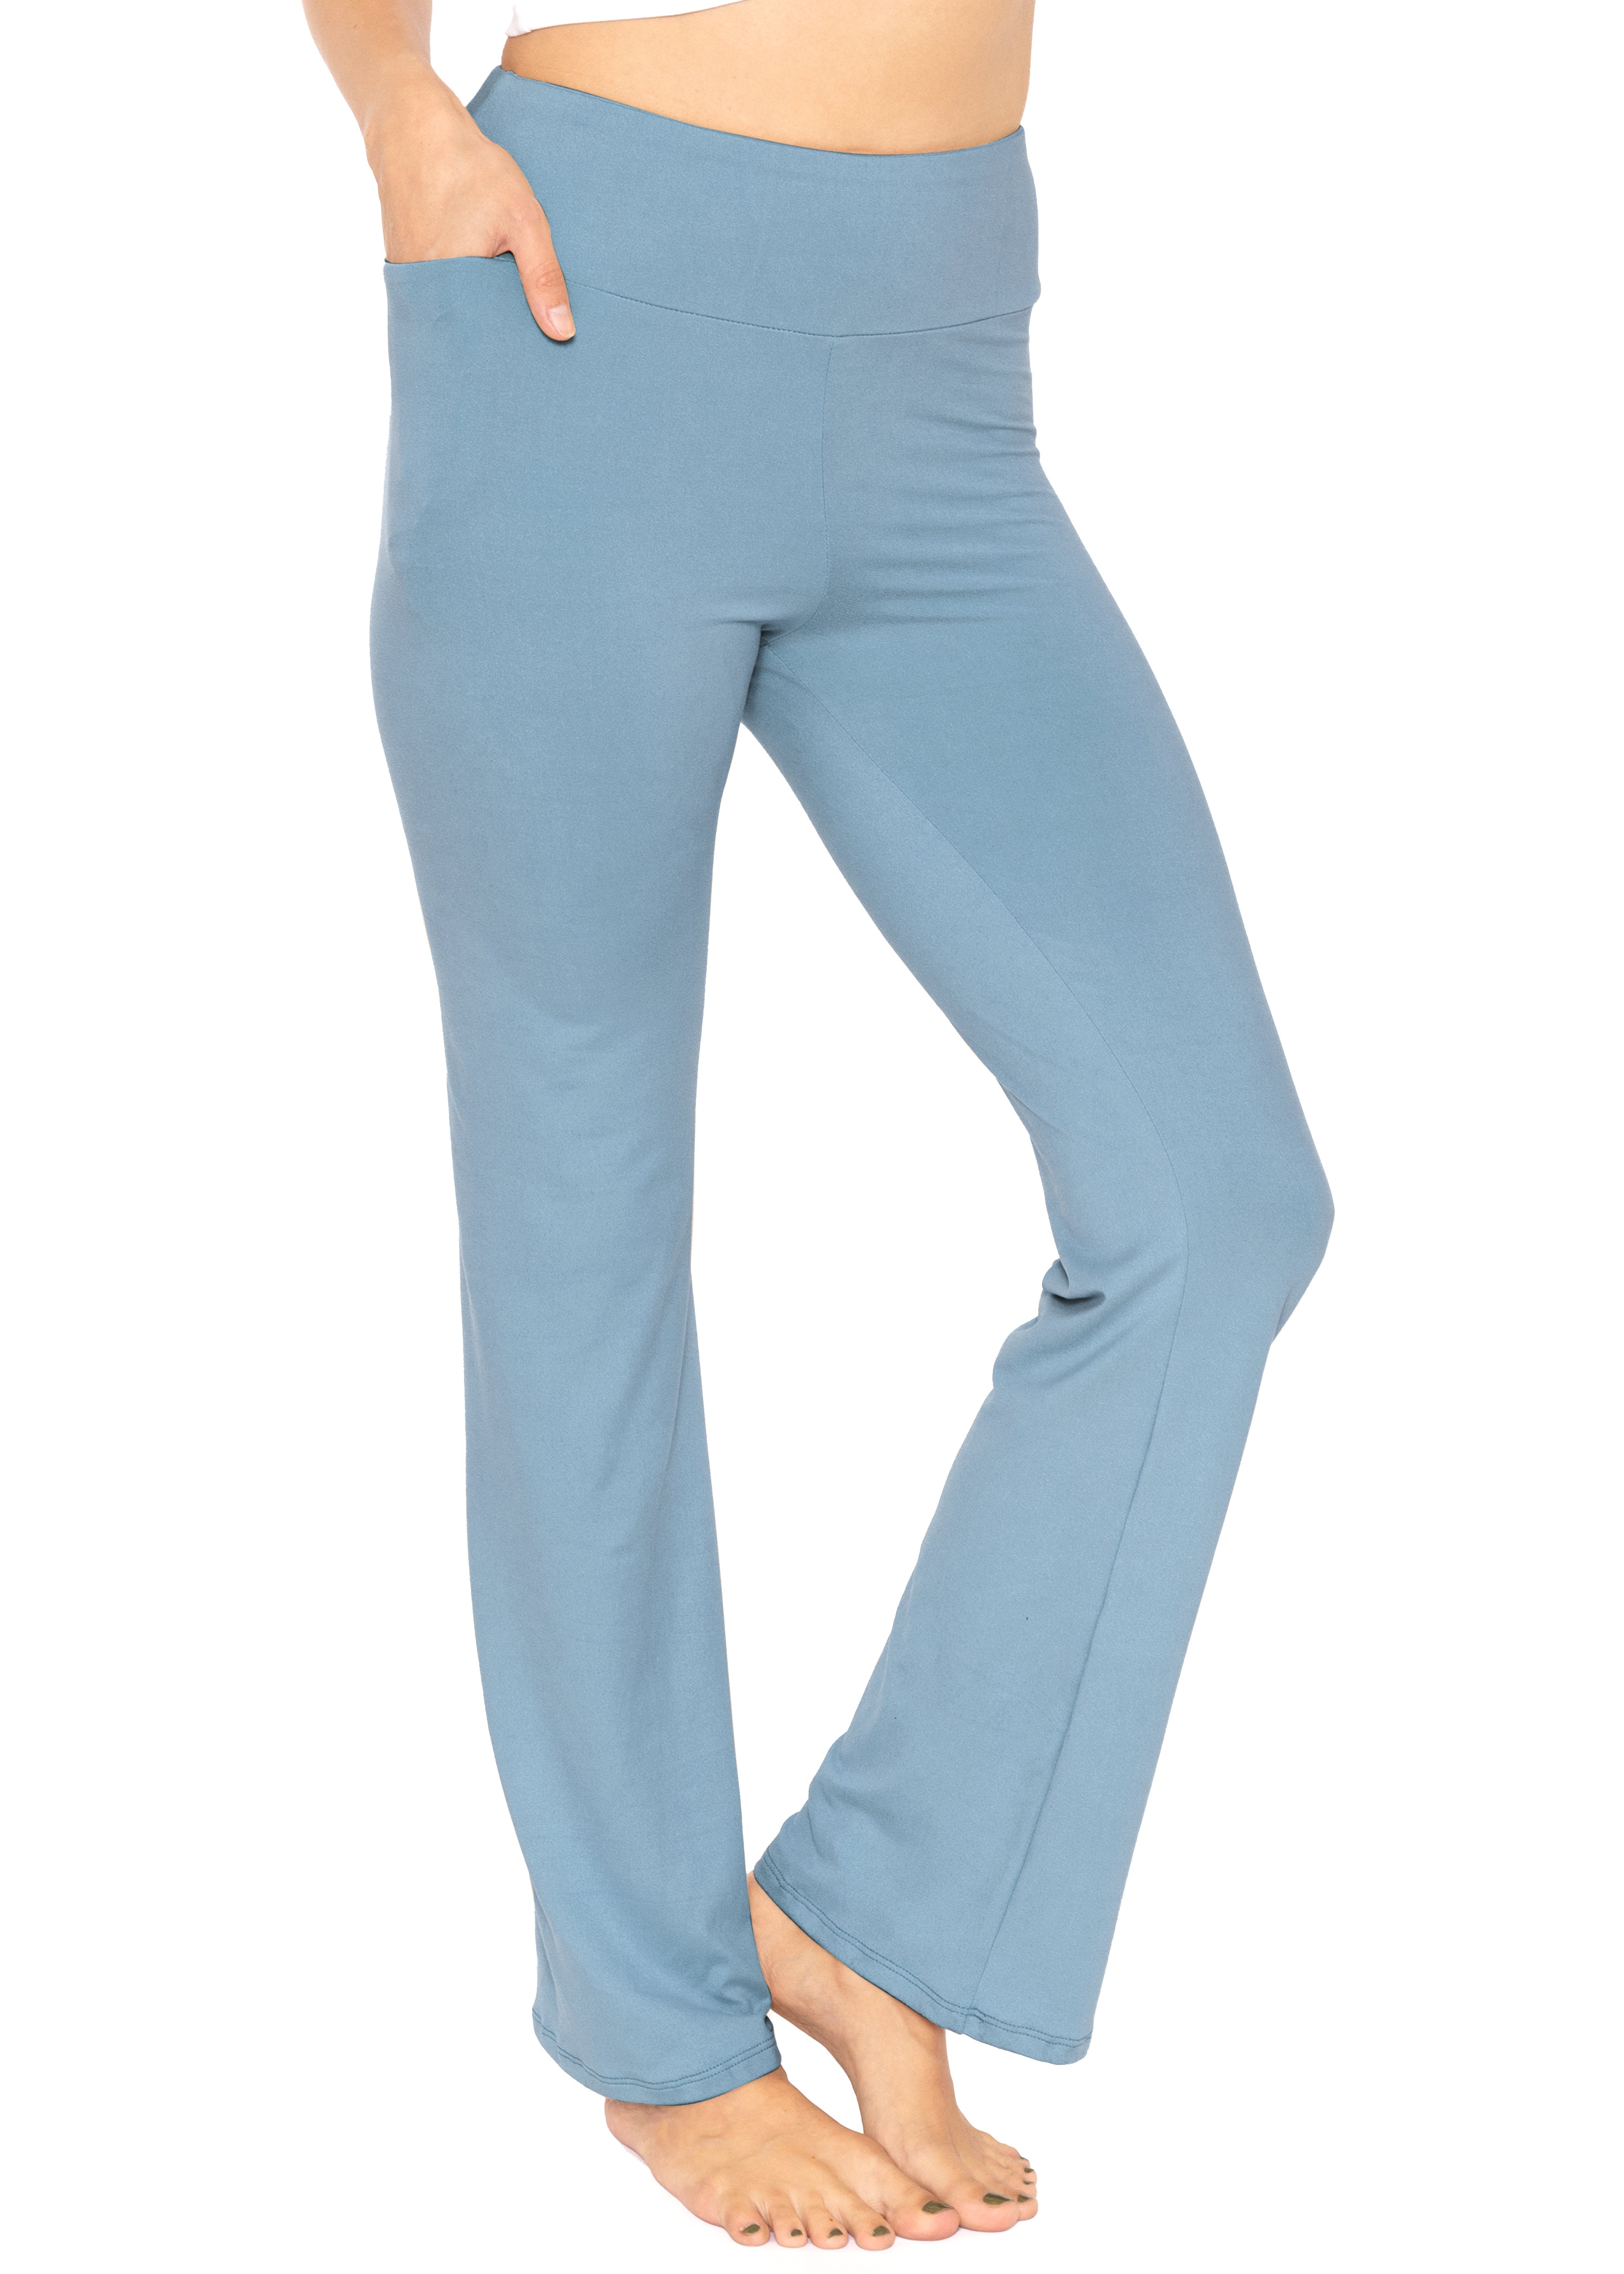 Women's Pants Solid Color Pocket Straight Tube Loose Stretch Yoga Pants ...